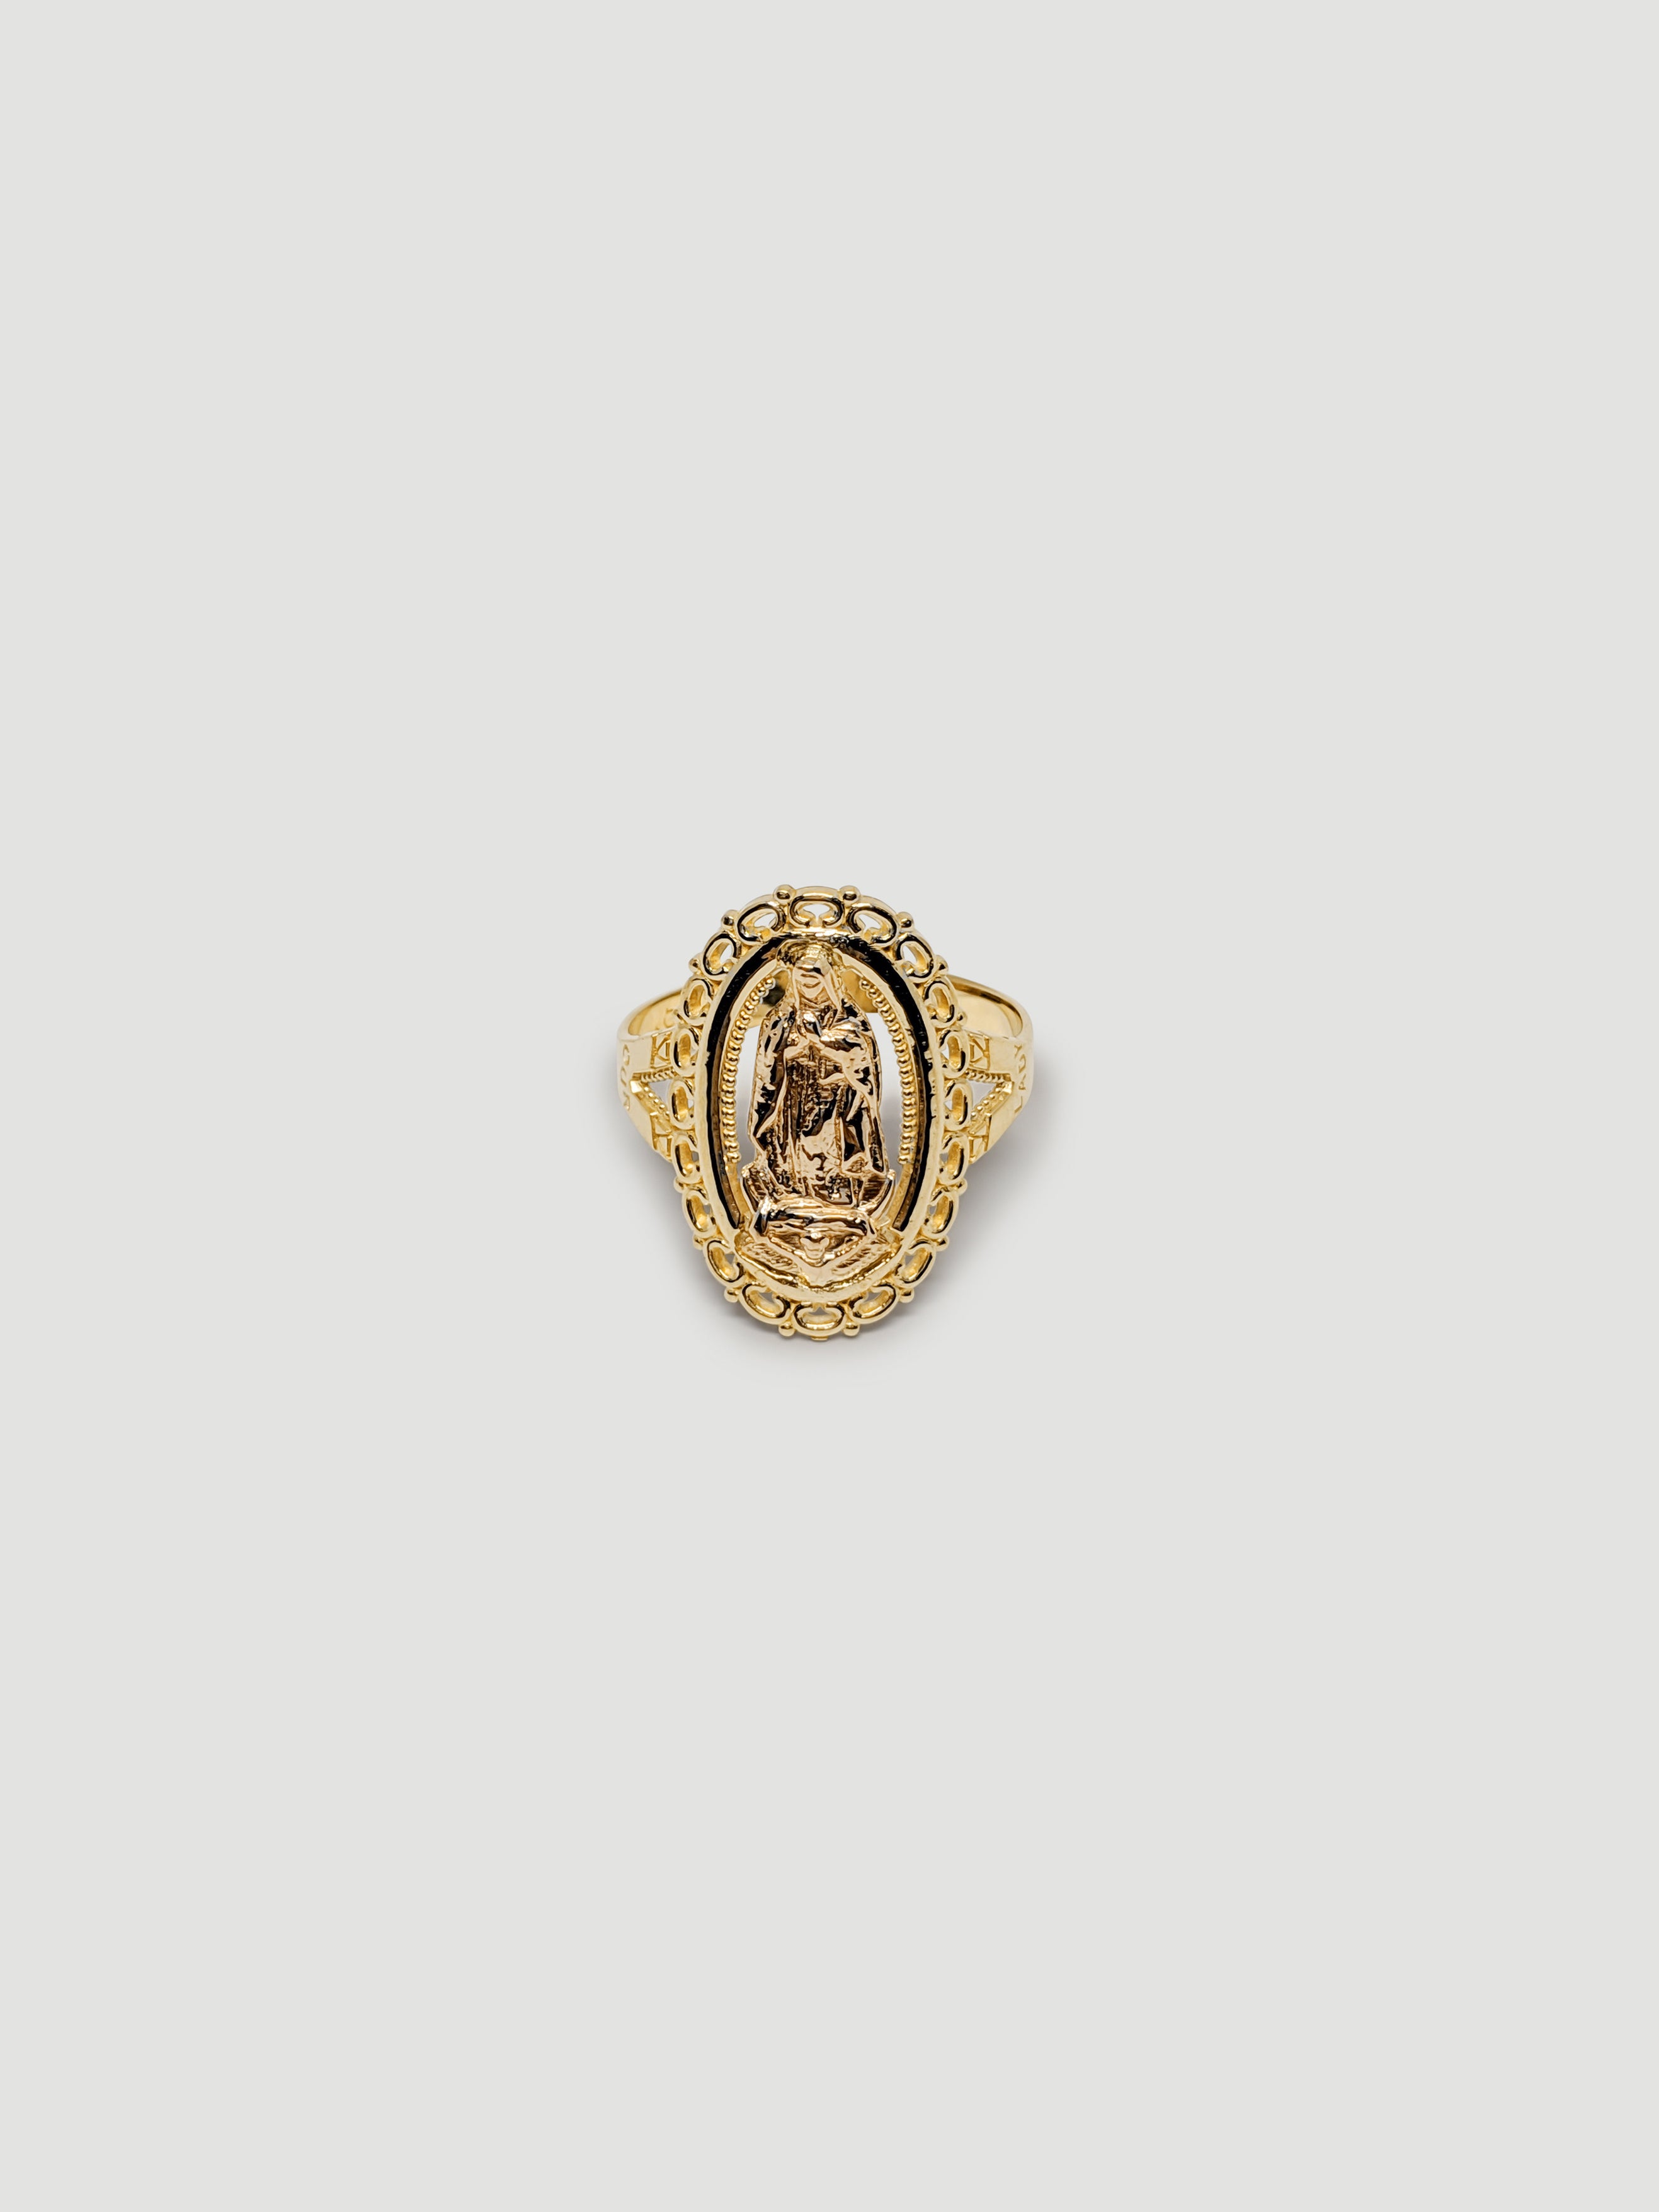 THE VIRGIN MARY RING